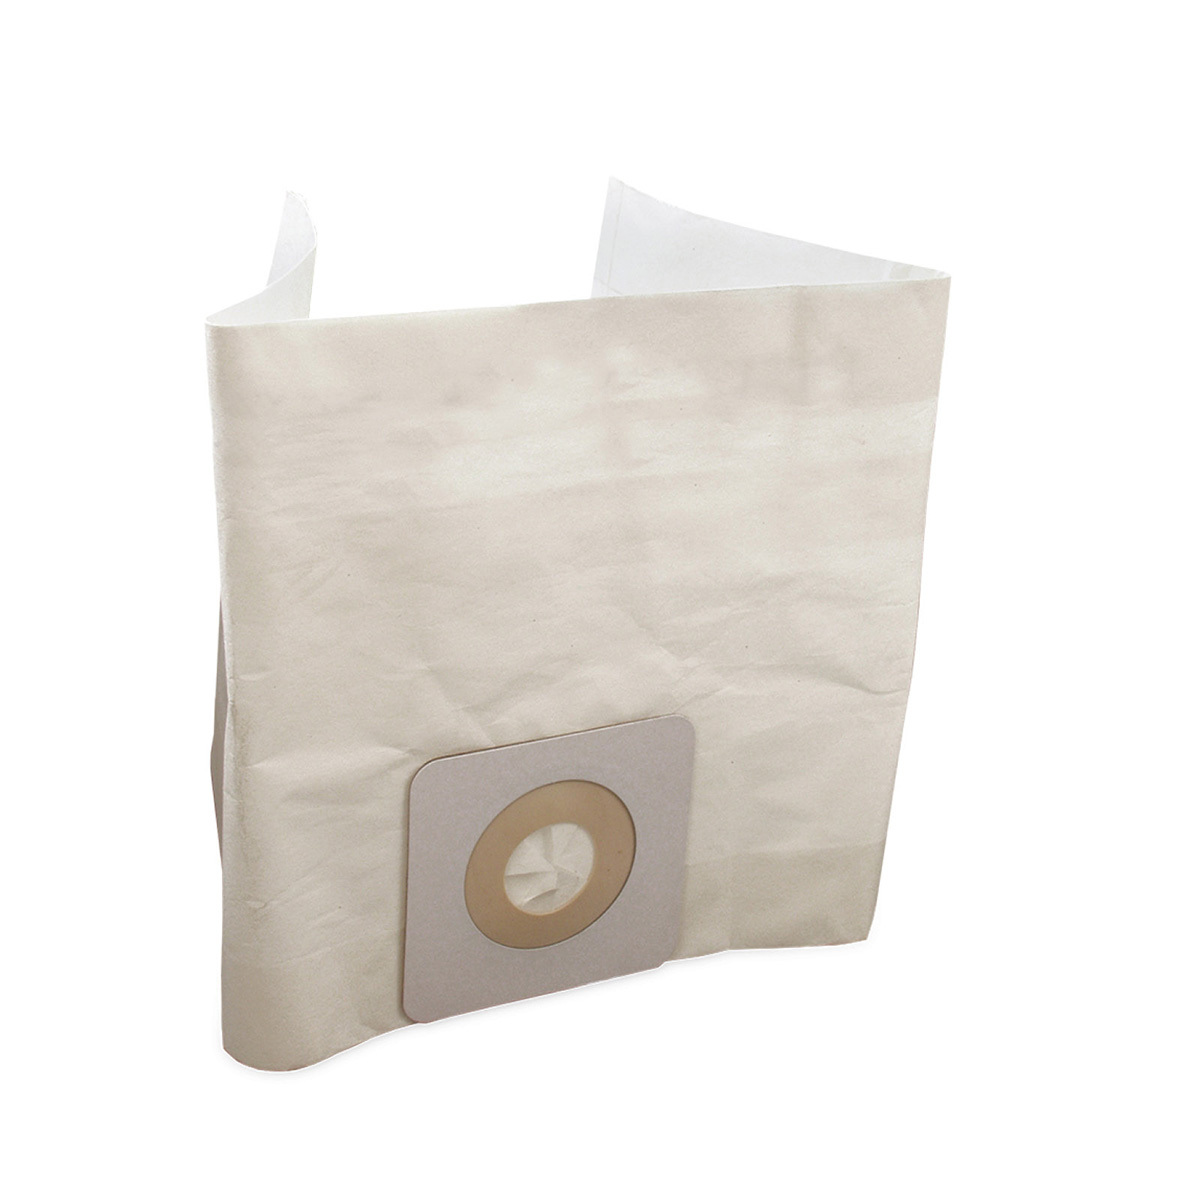 Disposable Paper Filter Bag (Pack of 10) for AC-13 or AC-18 Wet/Dry Vacuums - MTM190610